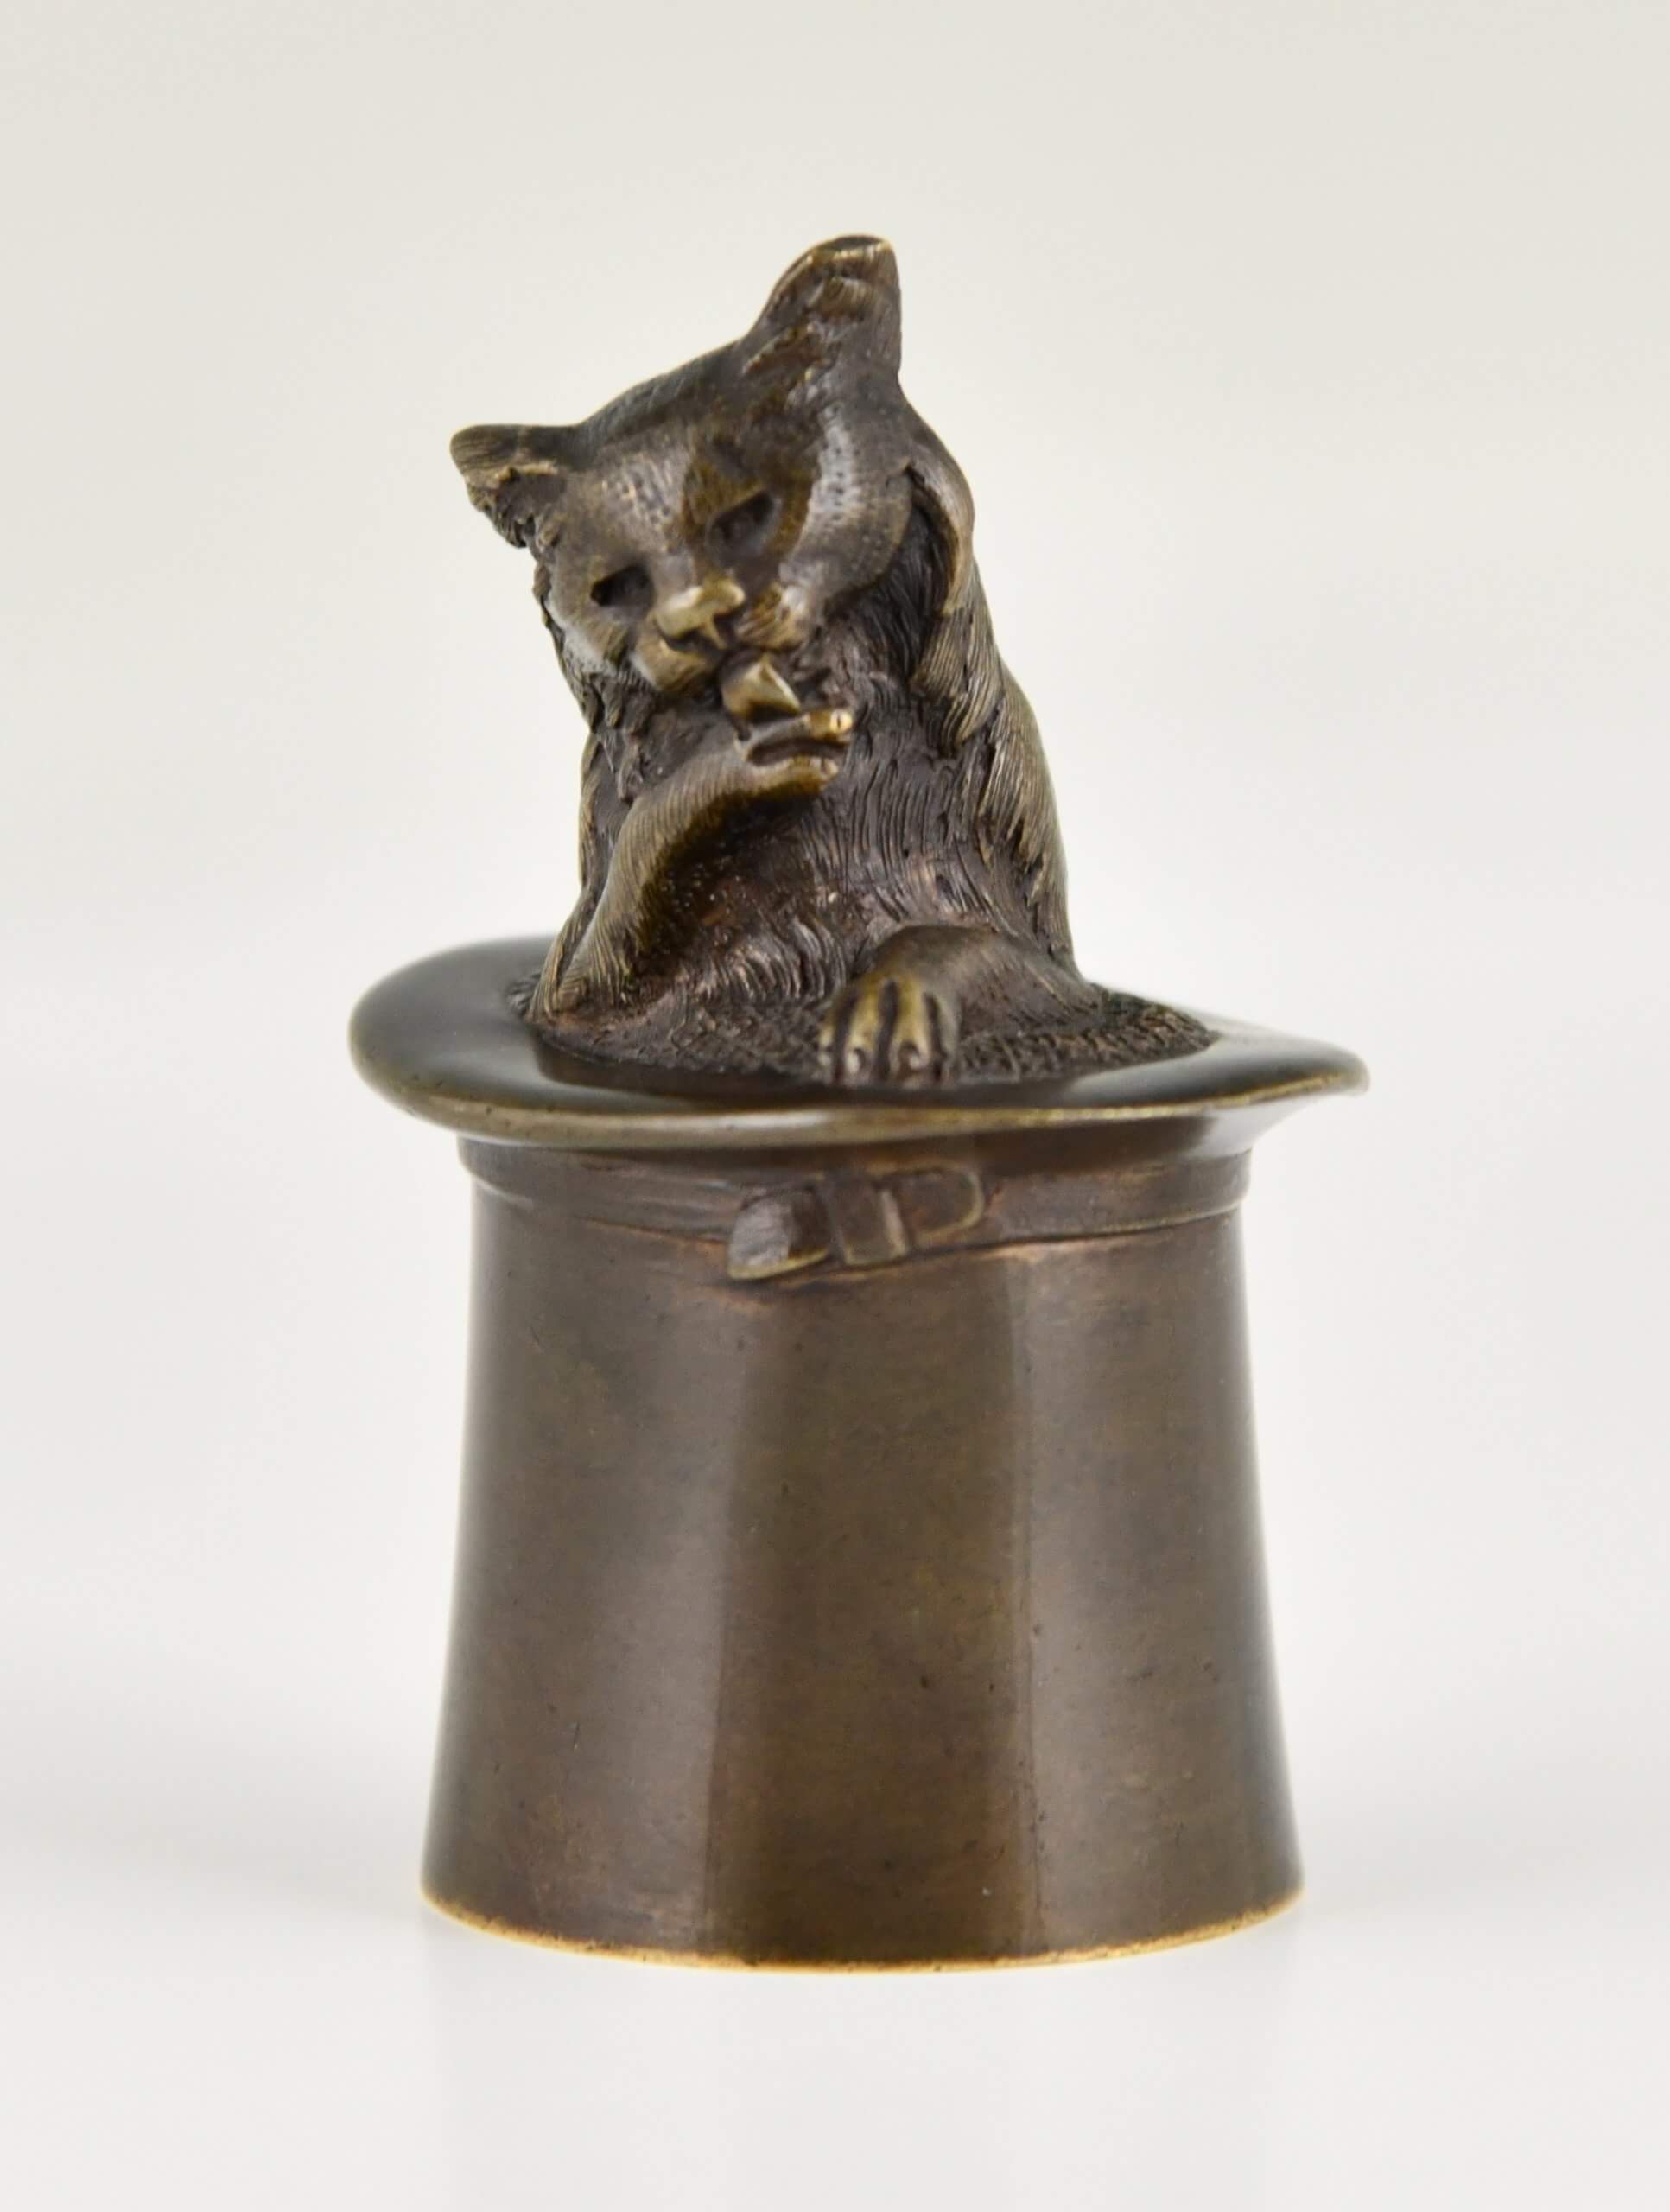 Antique bronze table bell cat in a top hat.